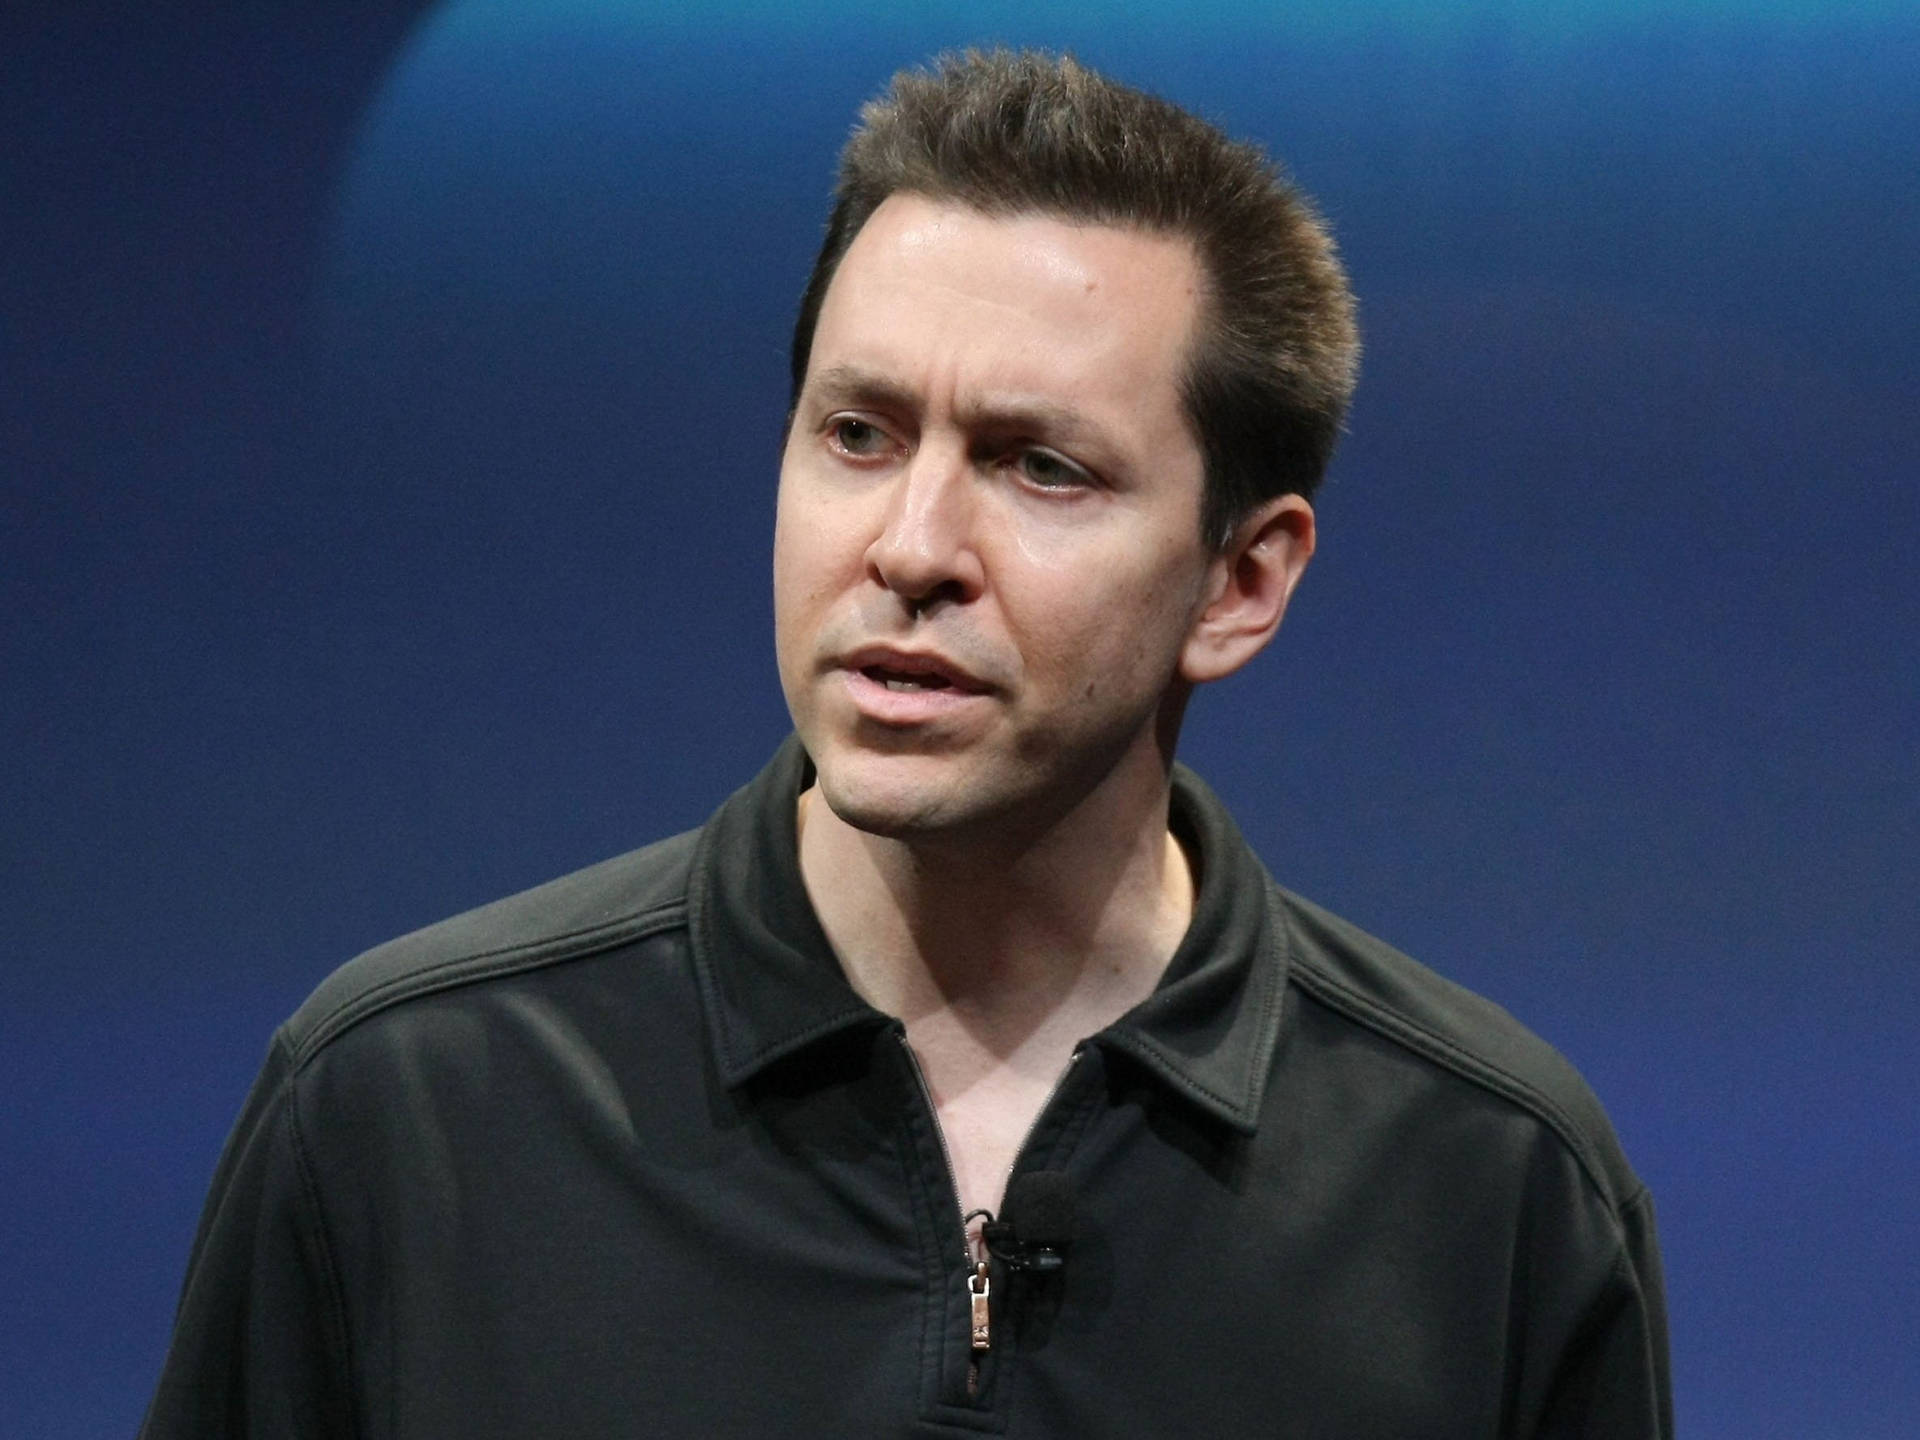 Scott Forstall Looking Thoughtful In A Presentation Background